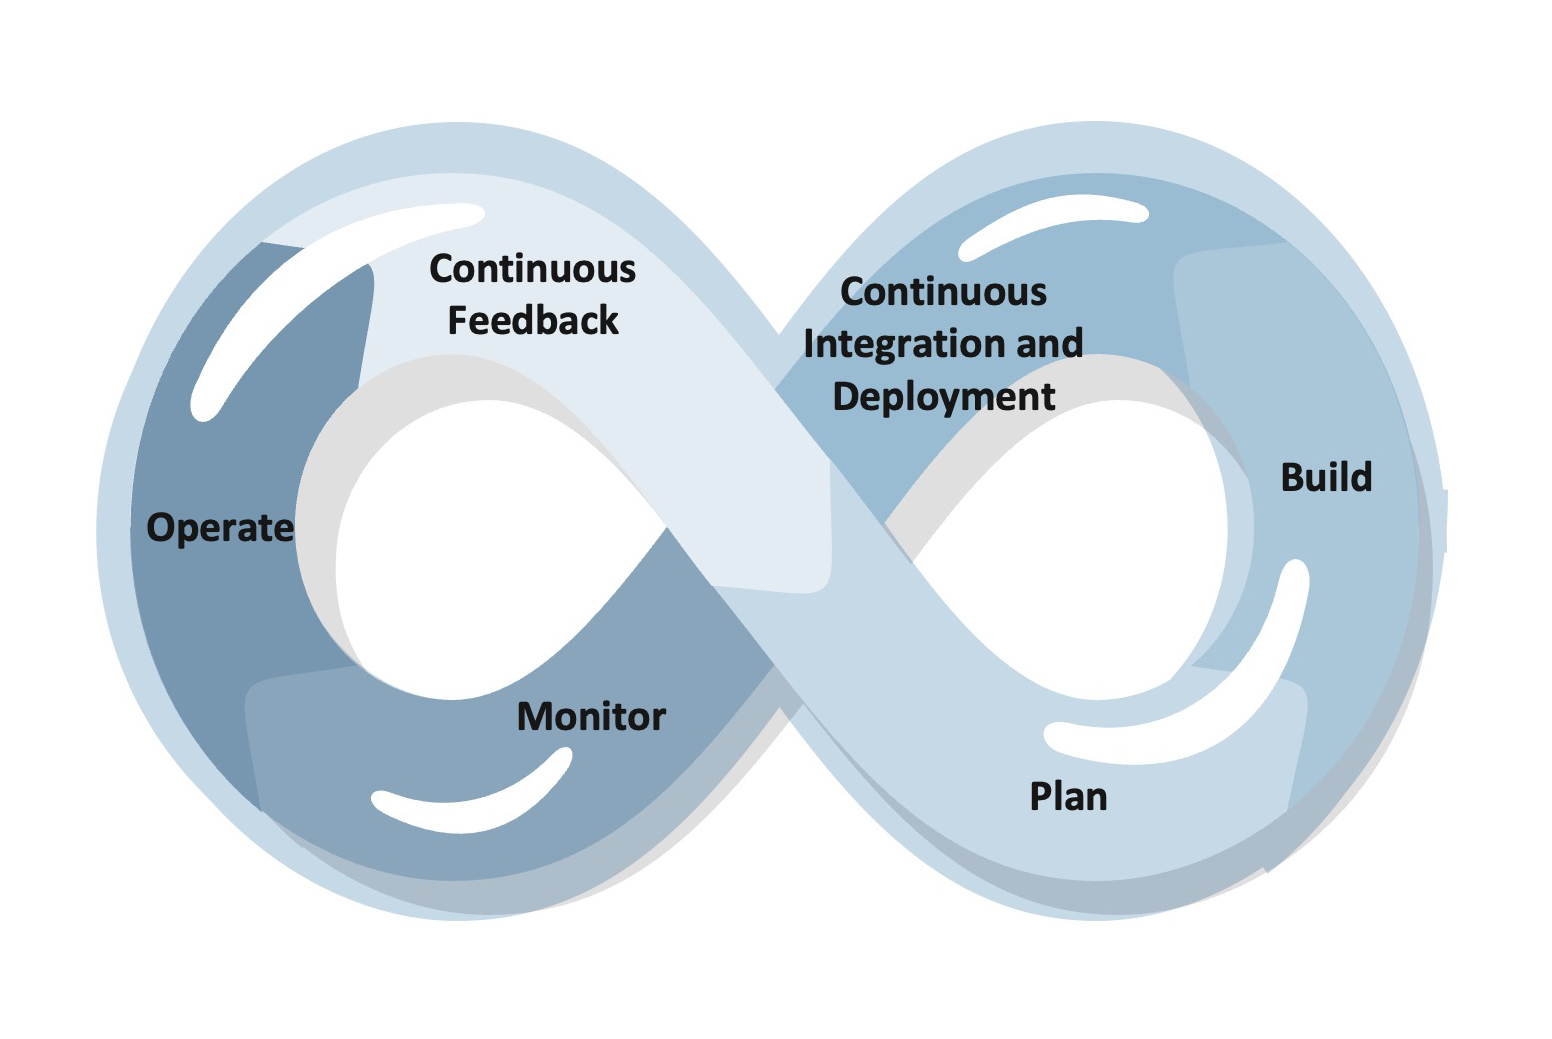 The DevOps lifecycle shows development (Dev) on the left and operations (Ops) on the right.